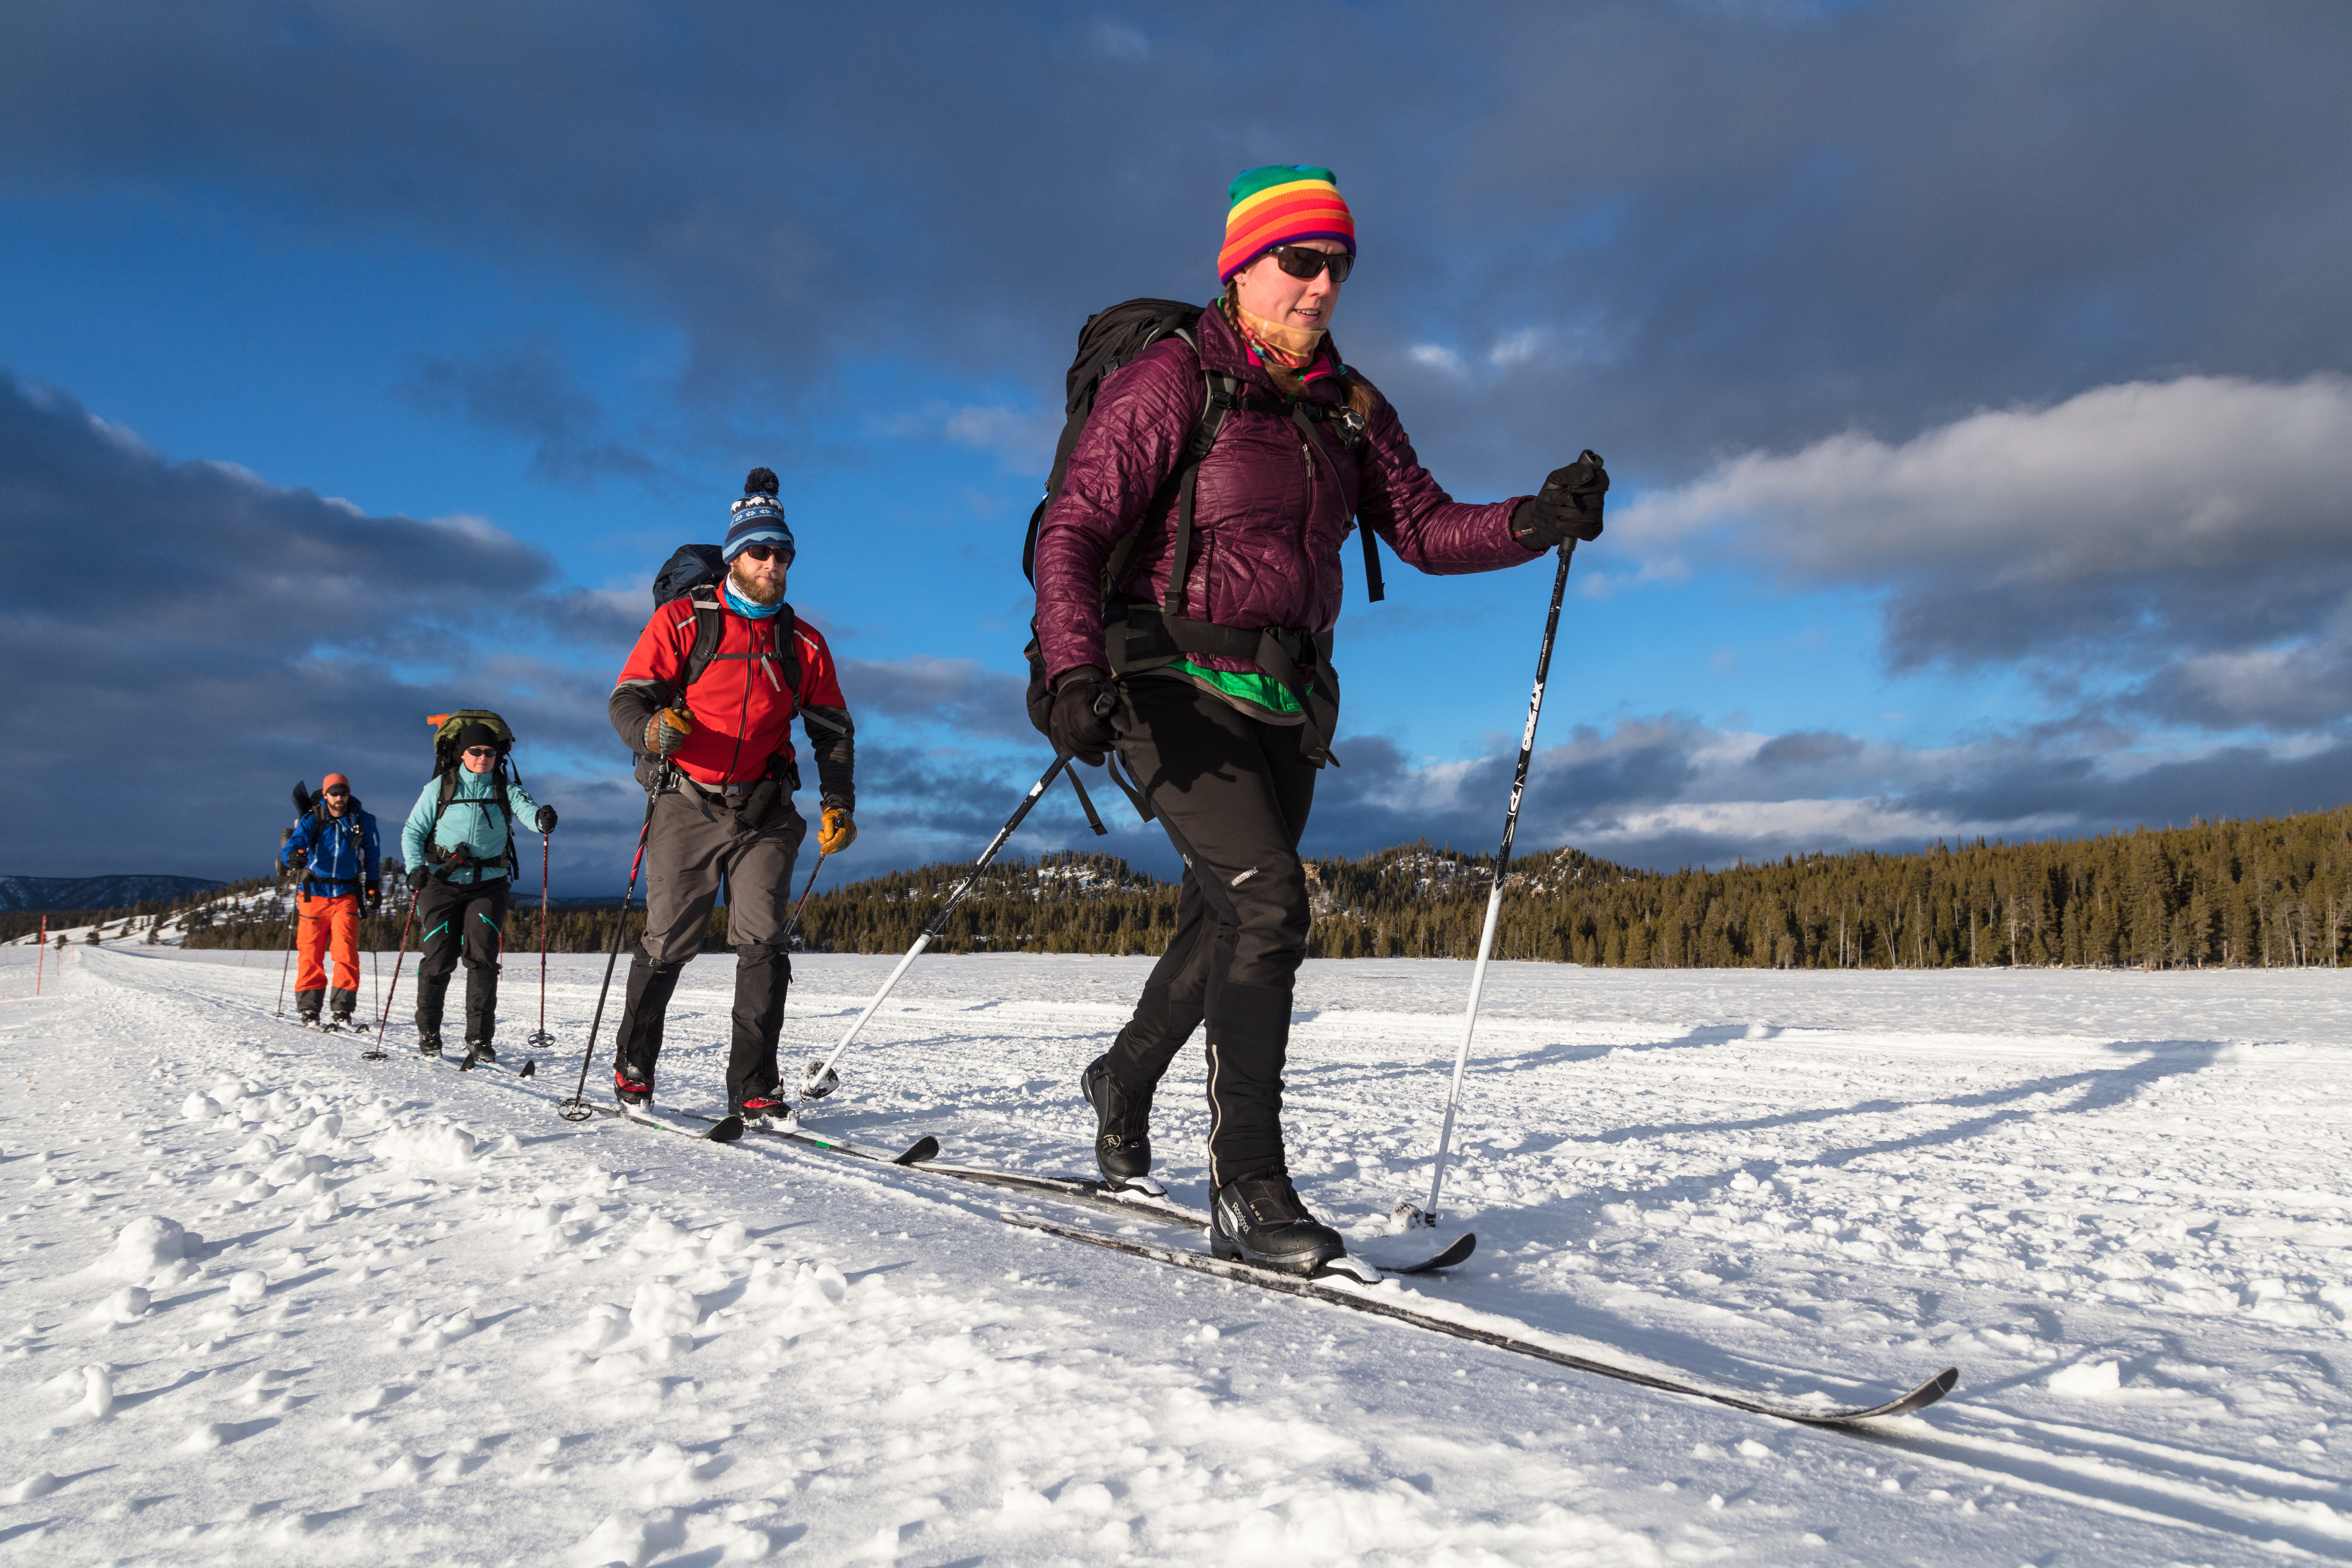 Four skiers in line skiing across open snow covered flats